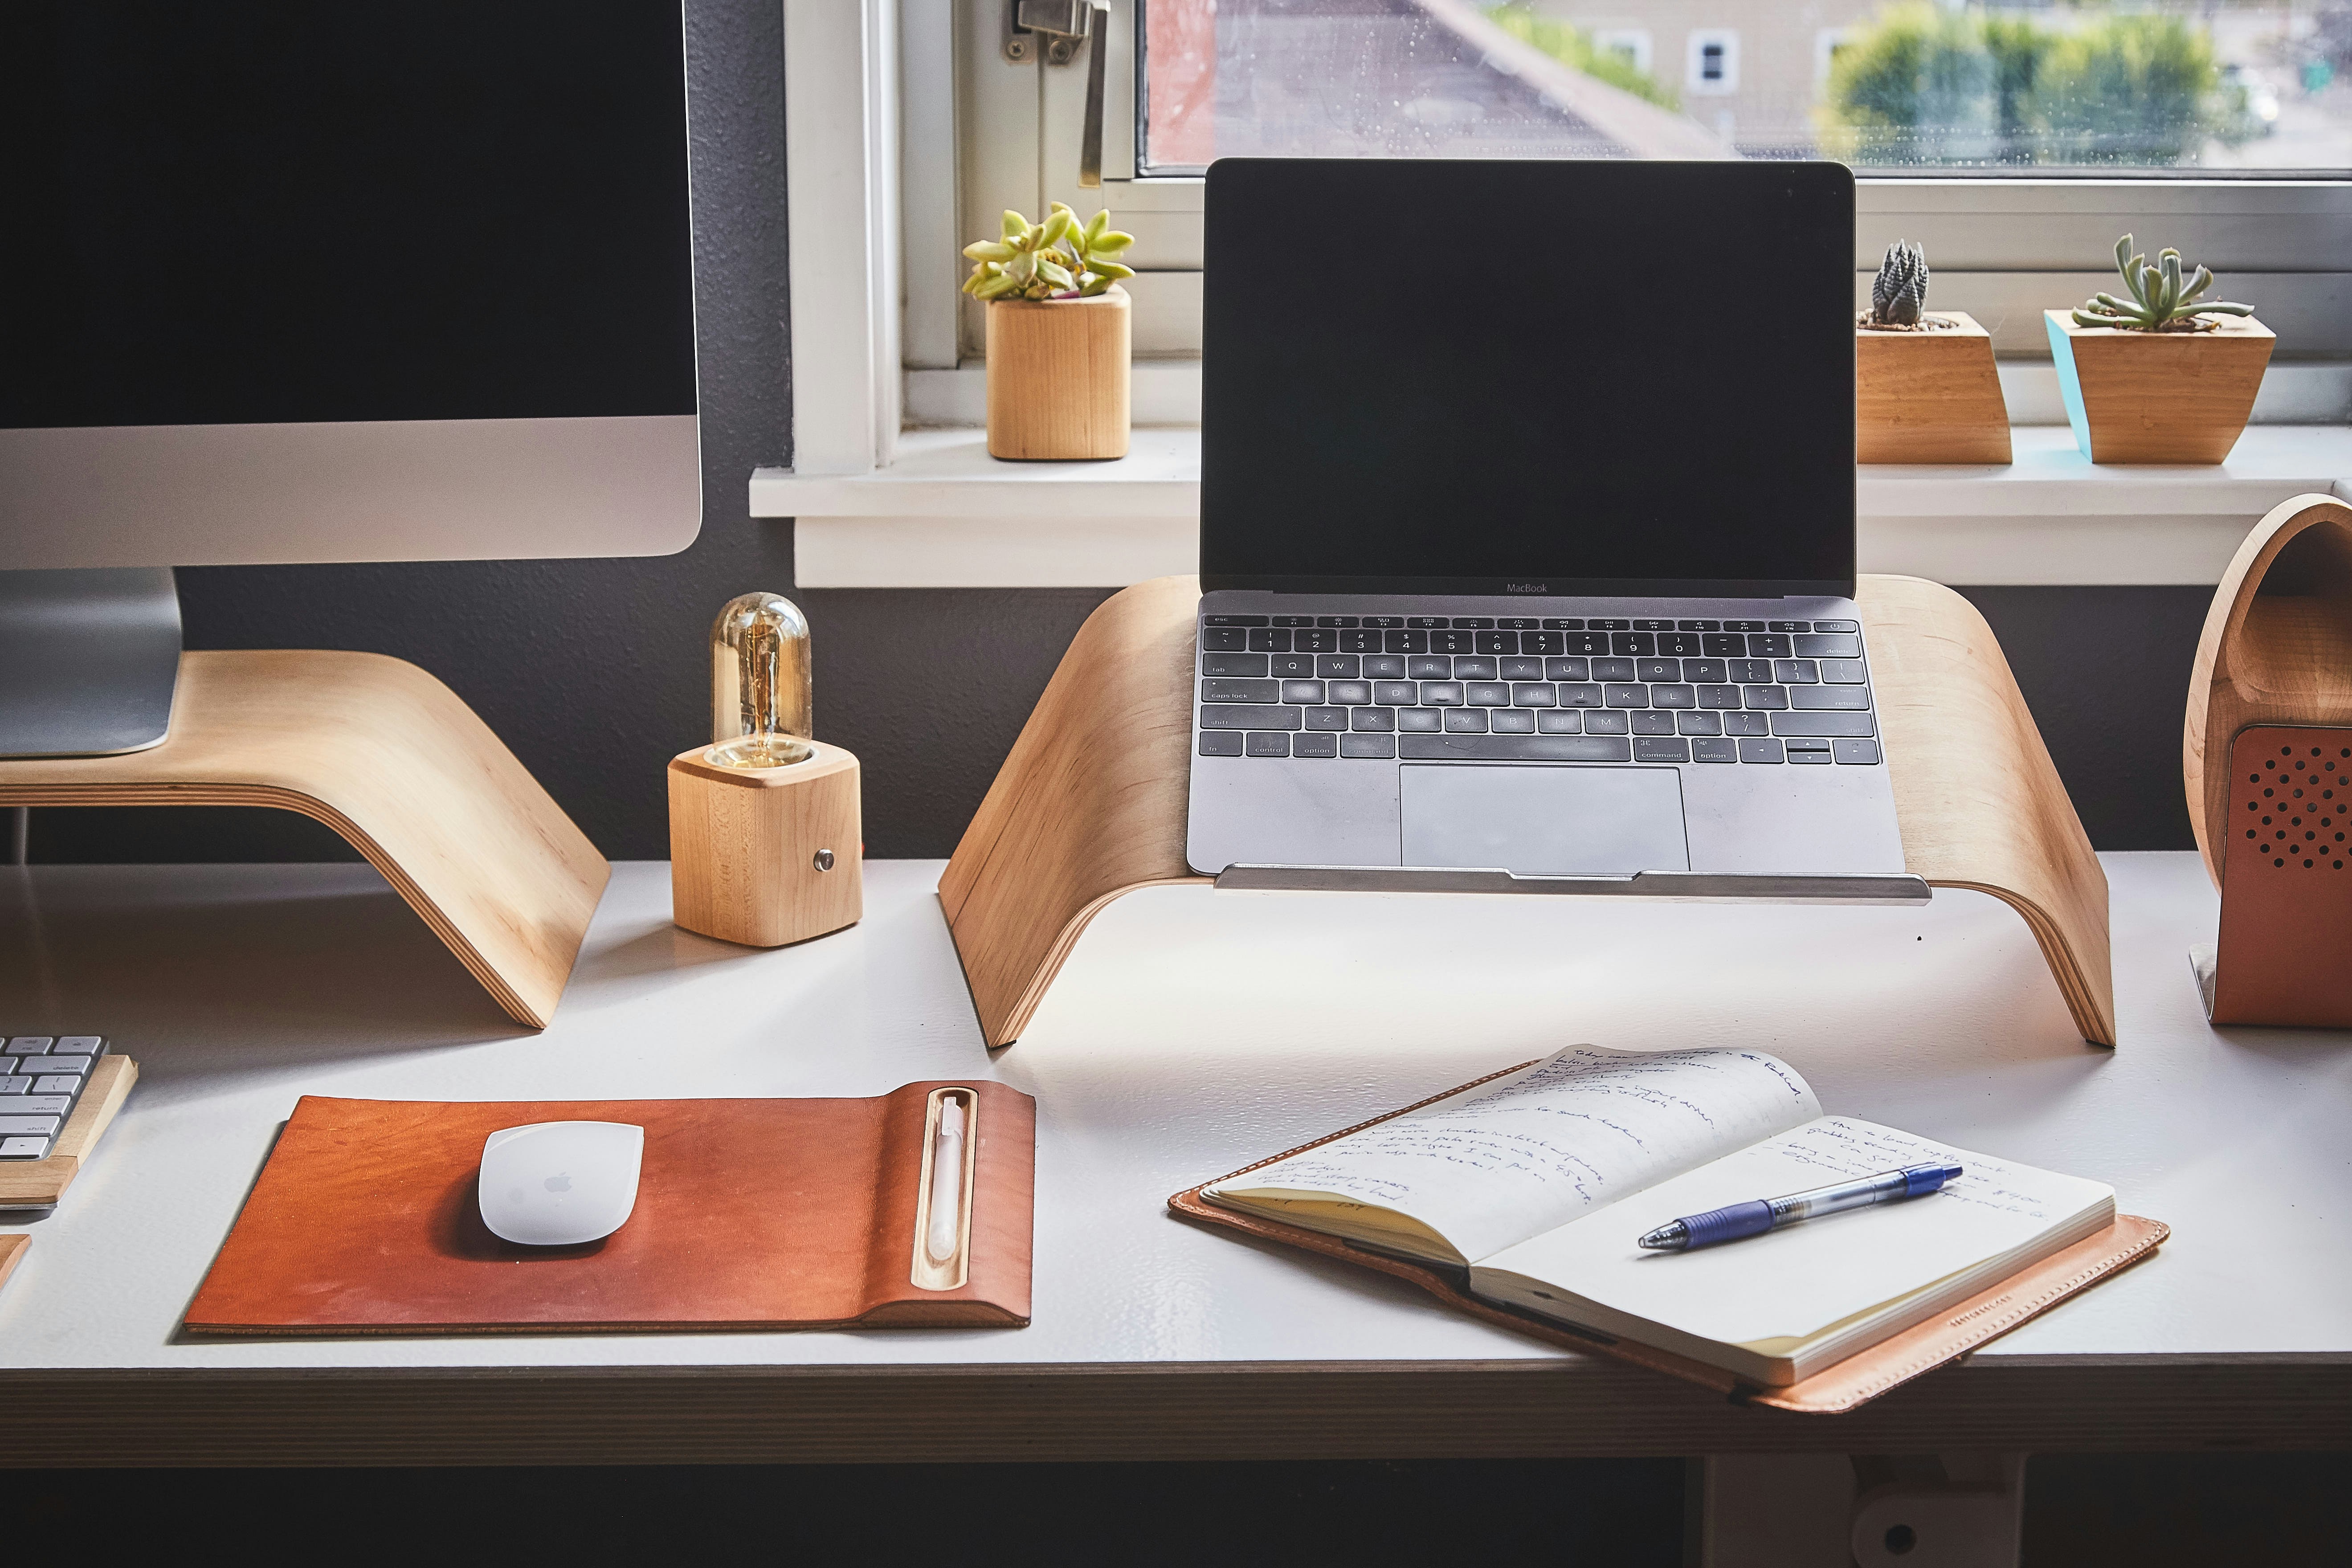 Office Stipend: Your home office should help you be your best while working remotely. Use the office stipend to setup your working environment just right.